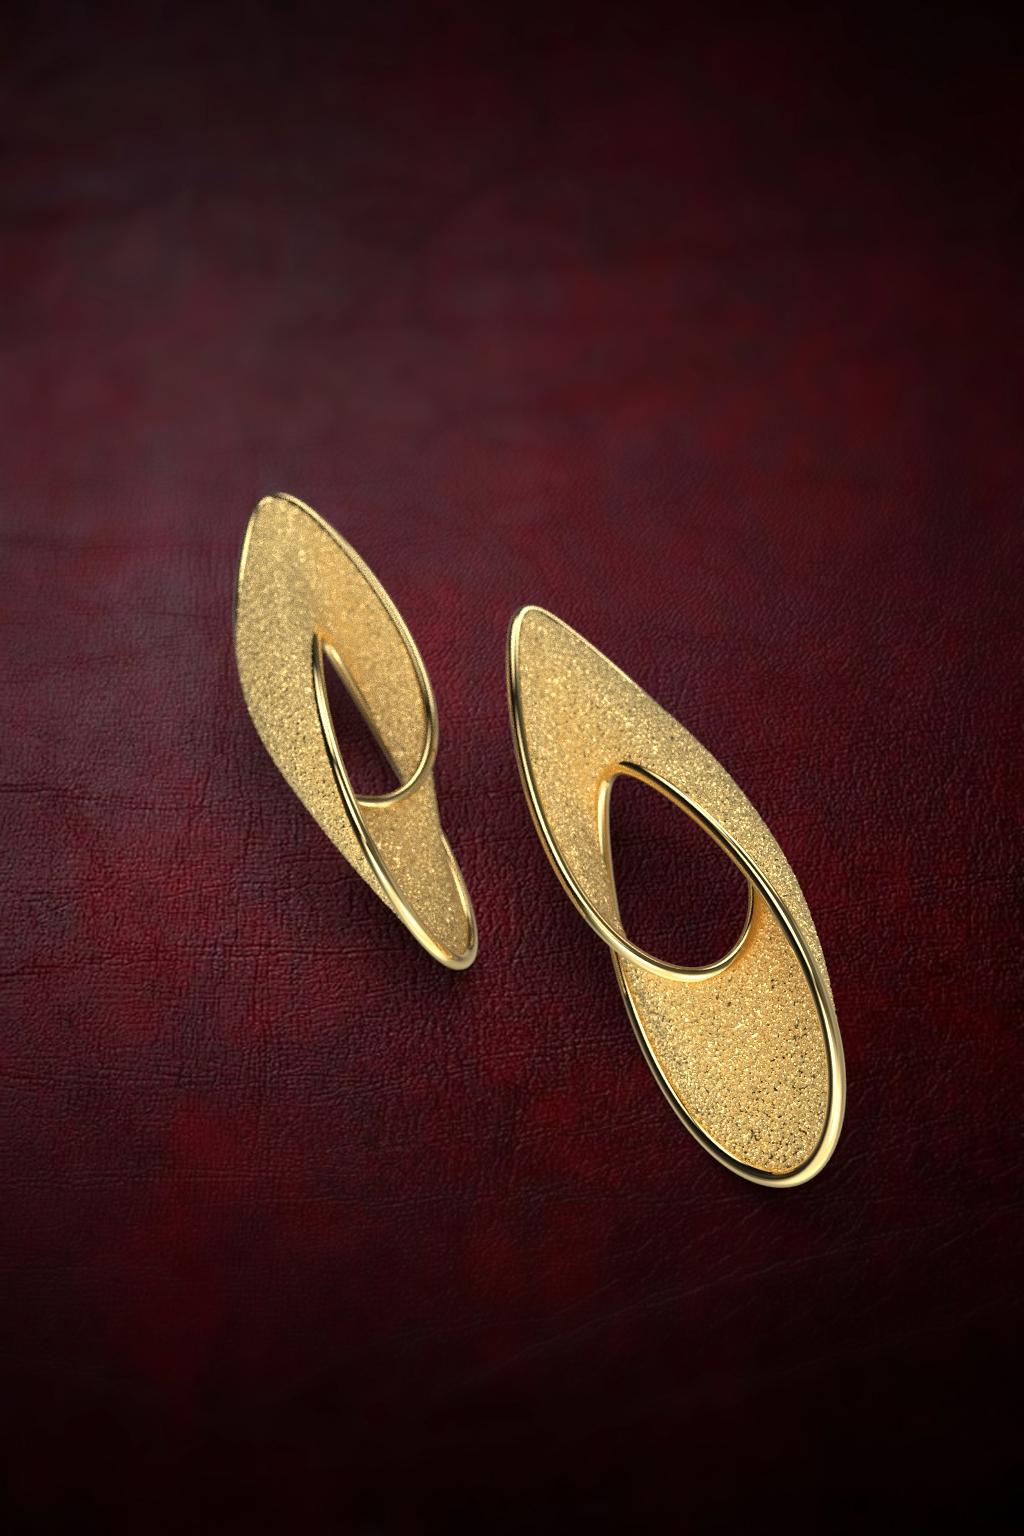 Contemporary Statement Gold Earrings in 14k Solid Gold, Made in Italy Fine Jewelry For Sale